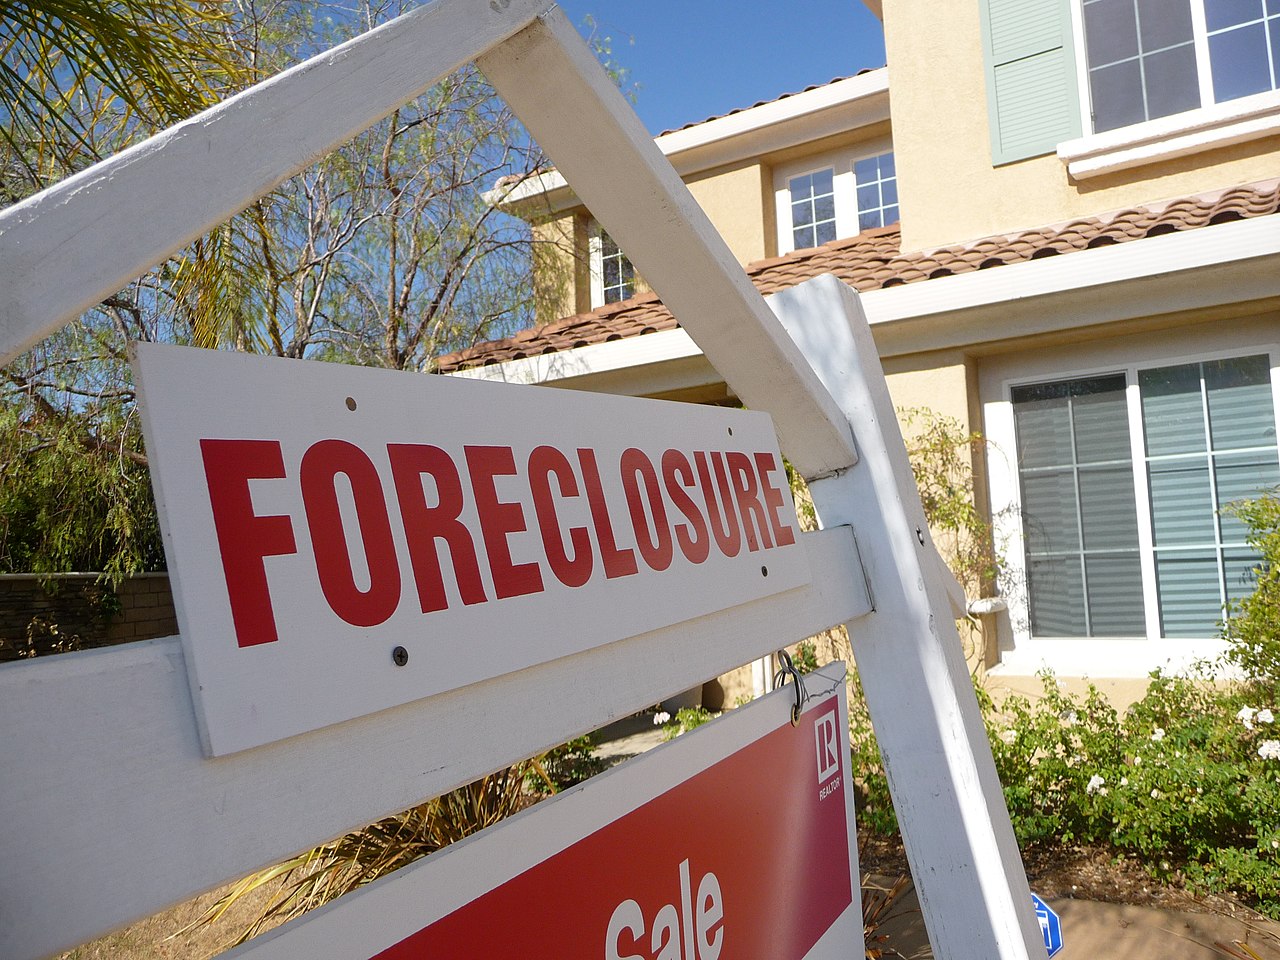 Here it comes: All signs point to Housing Bubble 2.0 amid widening price, income gap